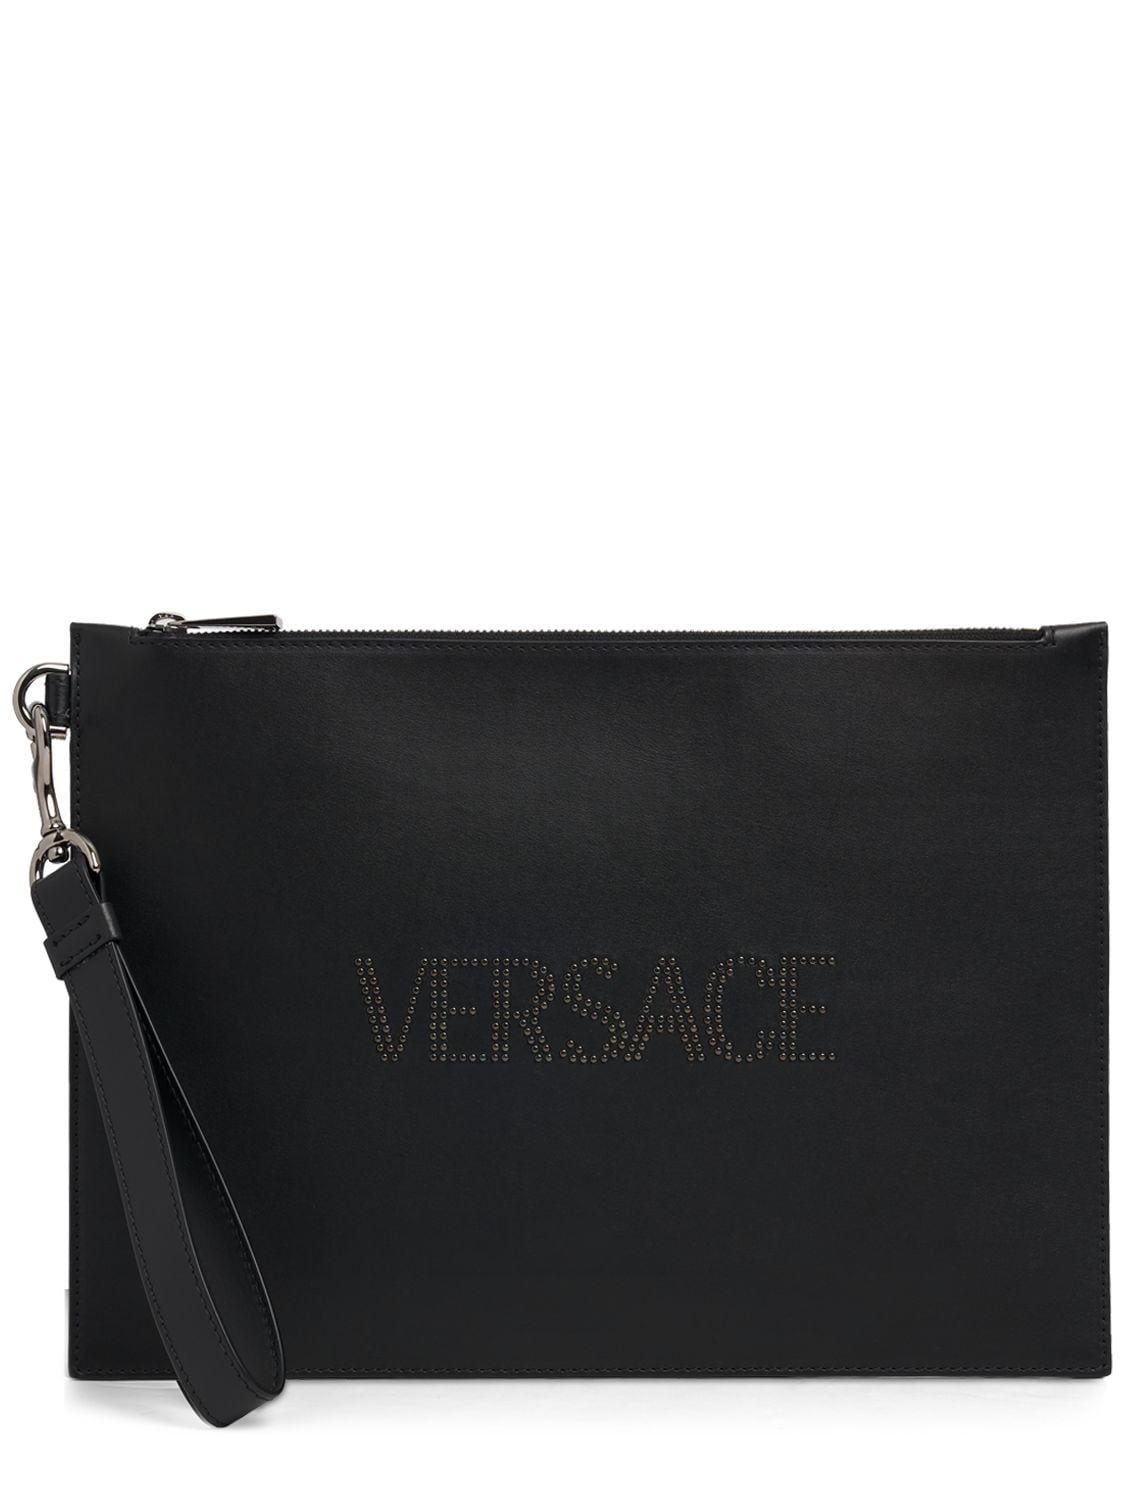 Versace Studded Logo Leather Flat Pouch in Black for Men | Lyst